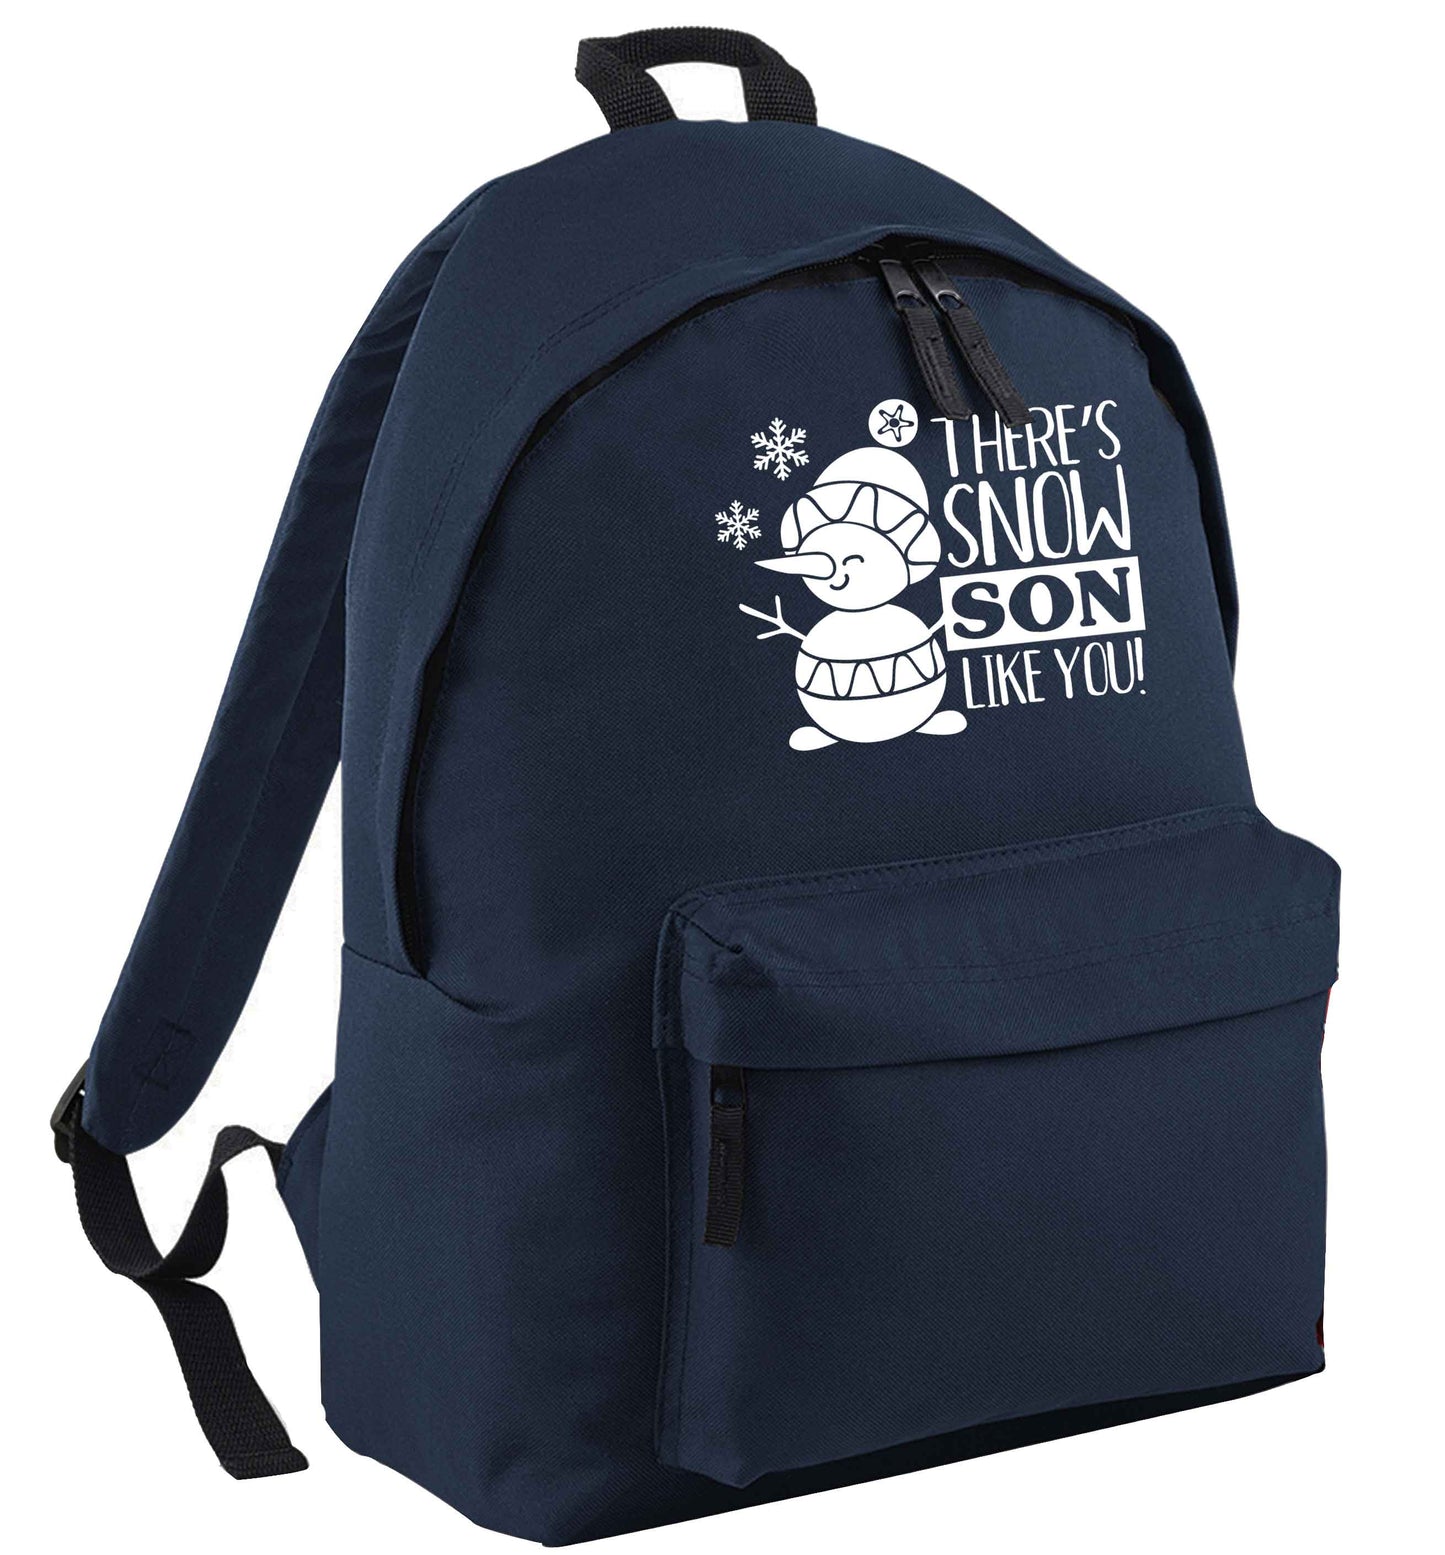 There's snow son like you | Children's backpack